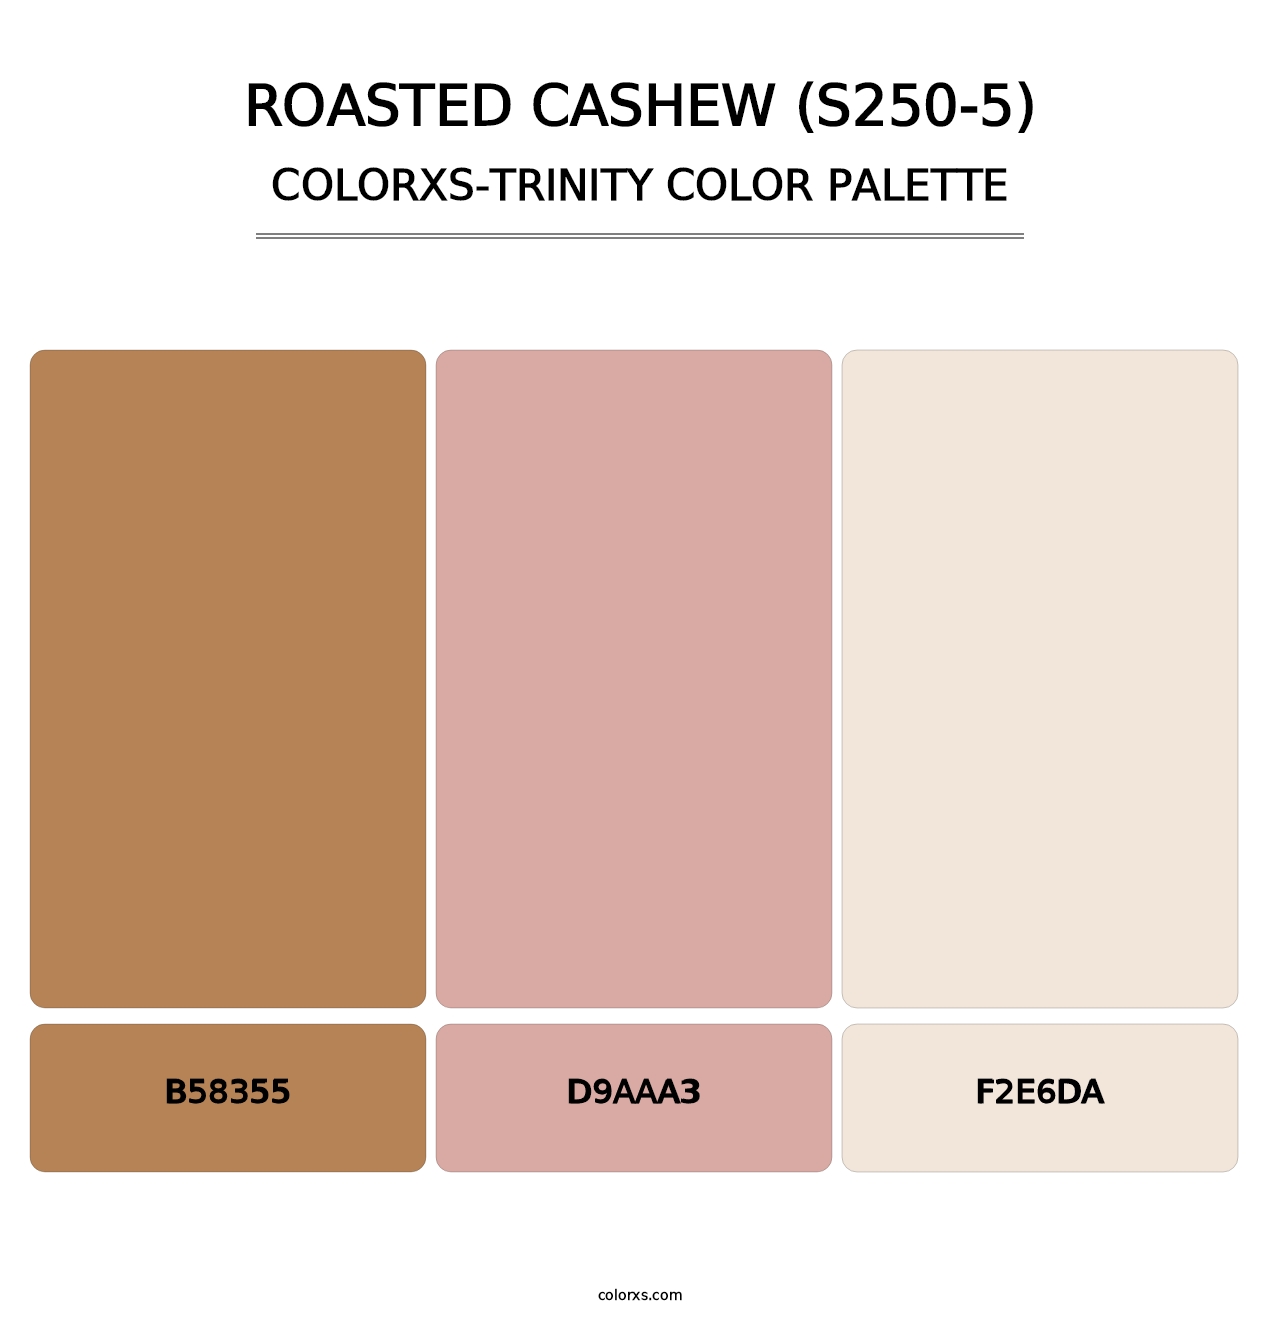 Roasted Cashew (S250-5) - Colorxs Trinity Palette